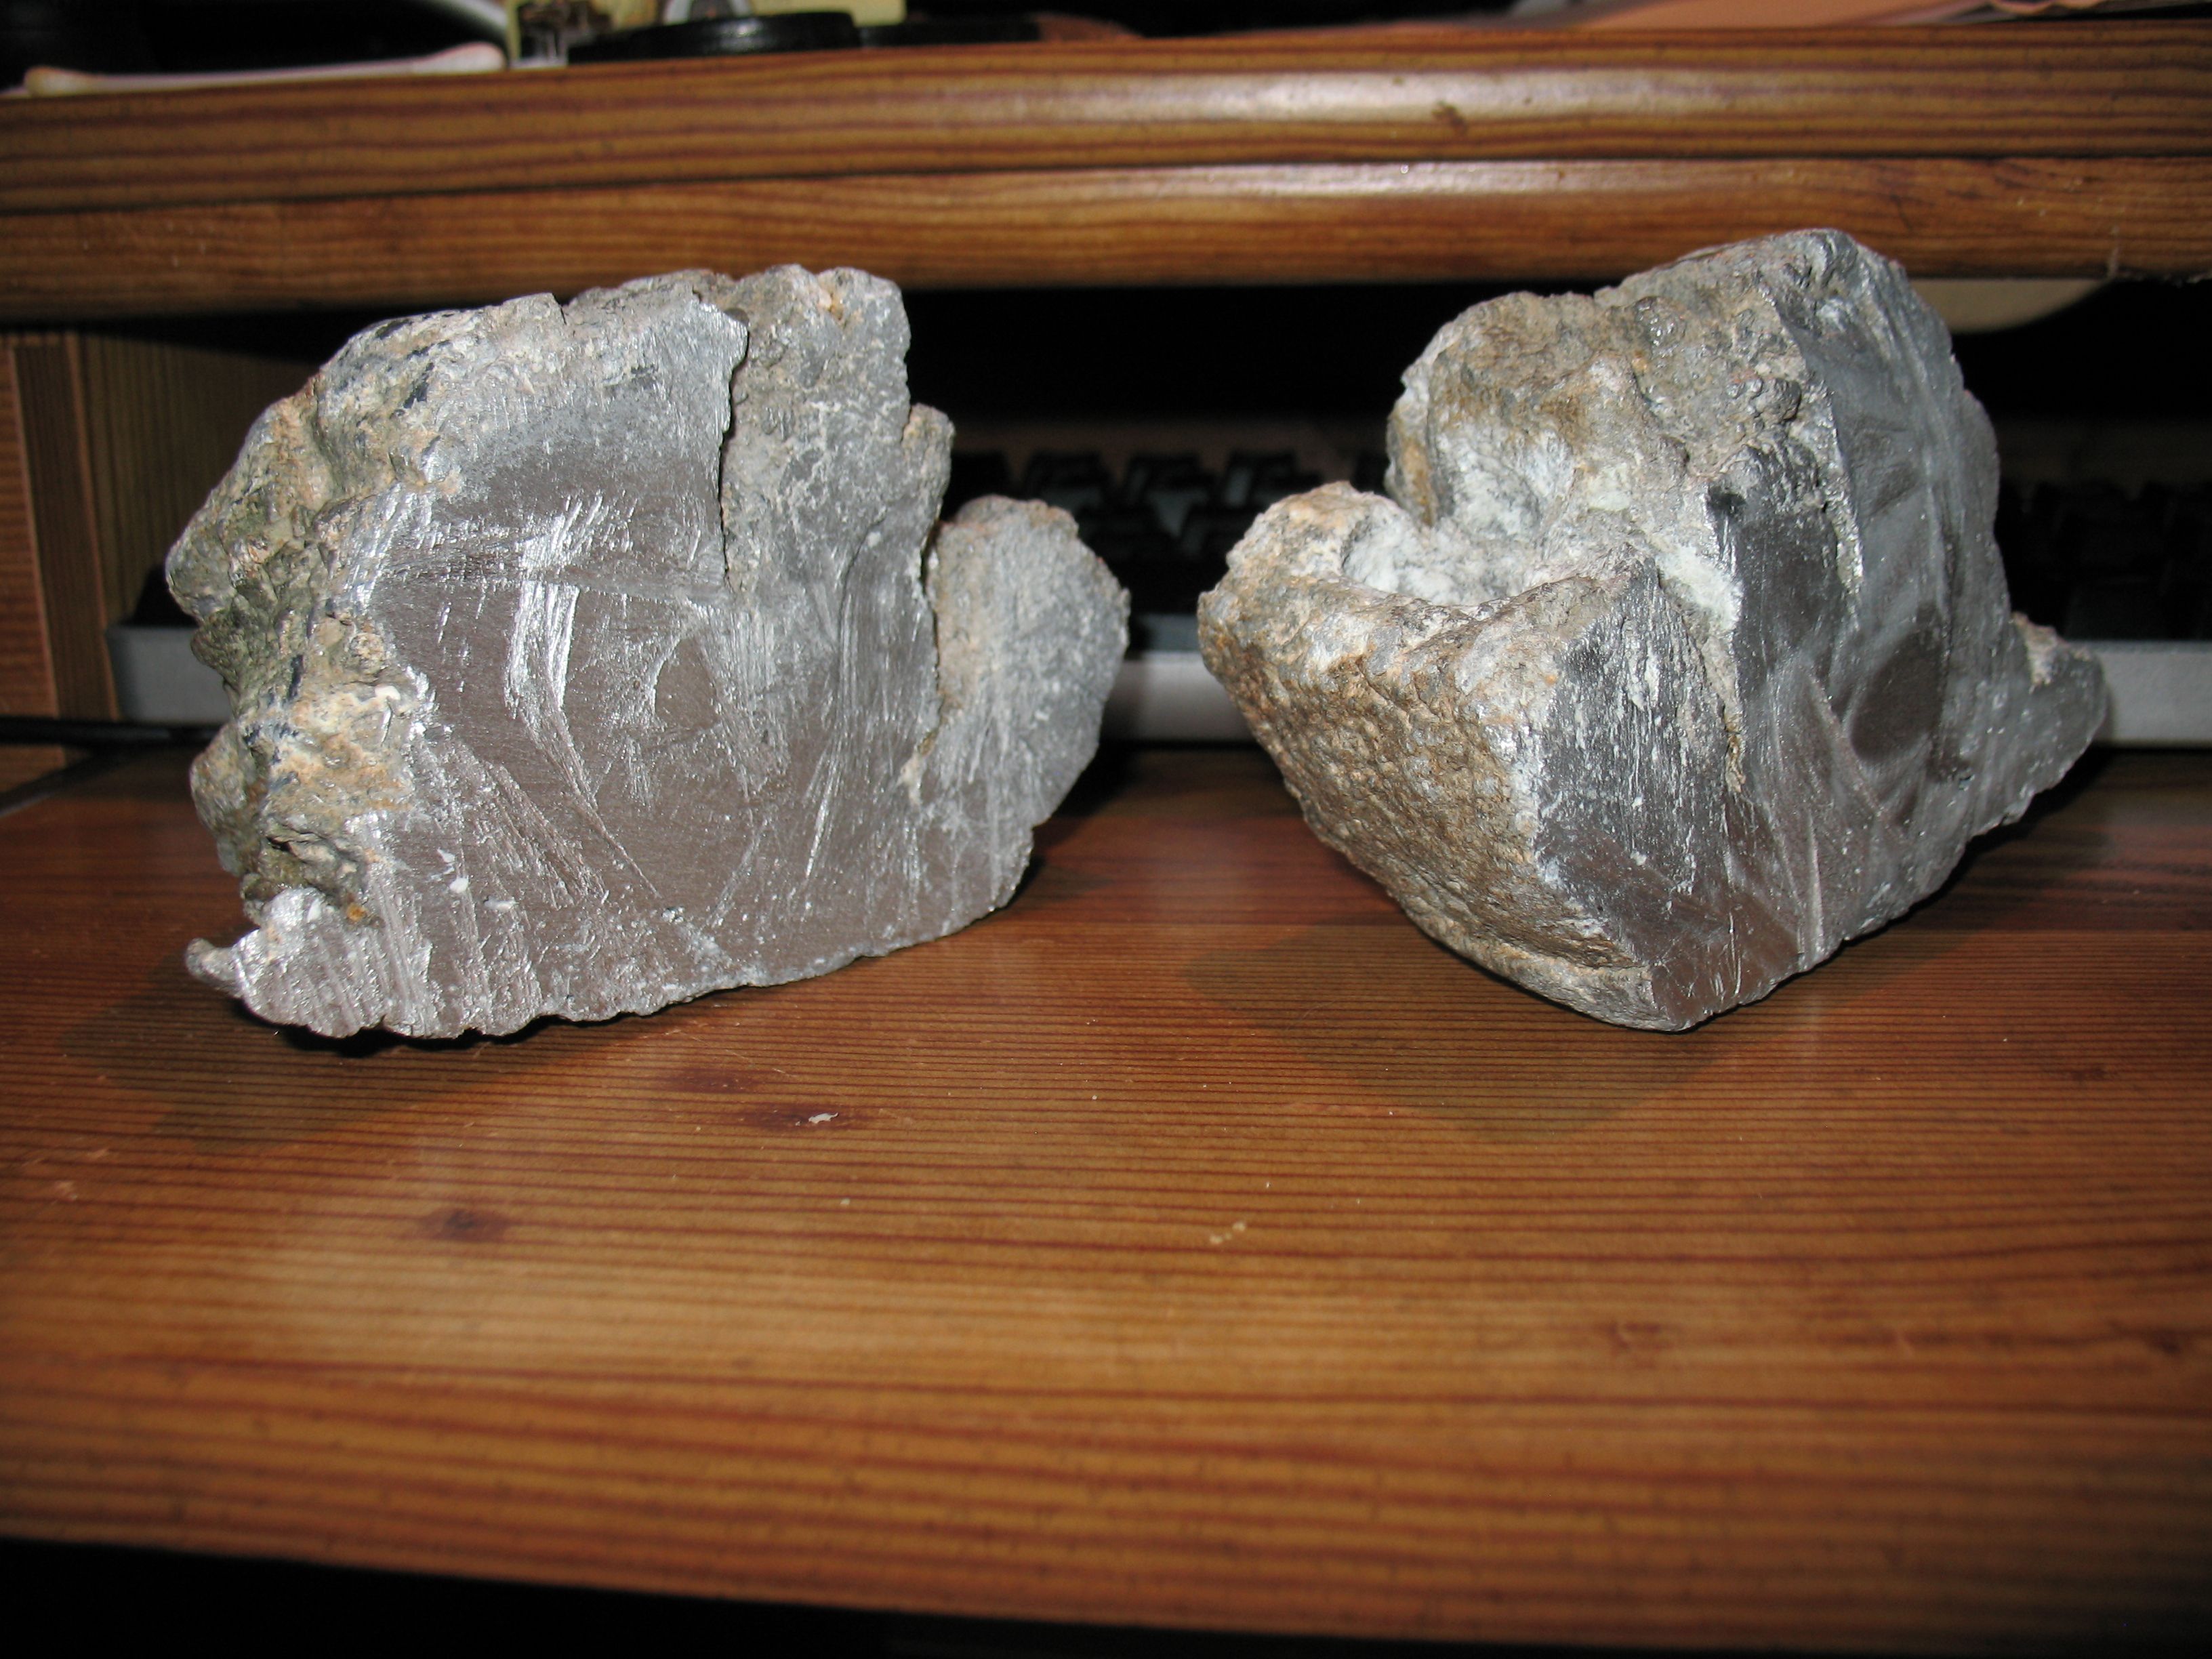 Same rock, but cut in half, albeit very badly. I will eventually grind and polish the surface.